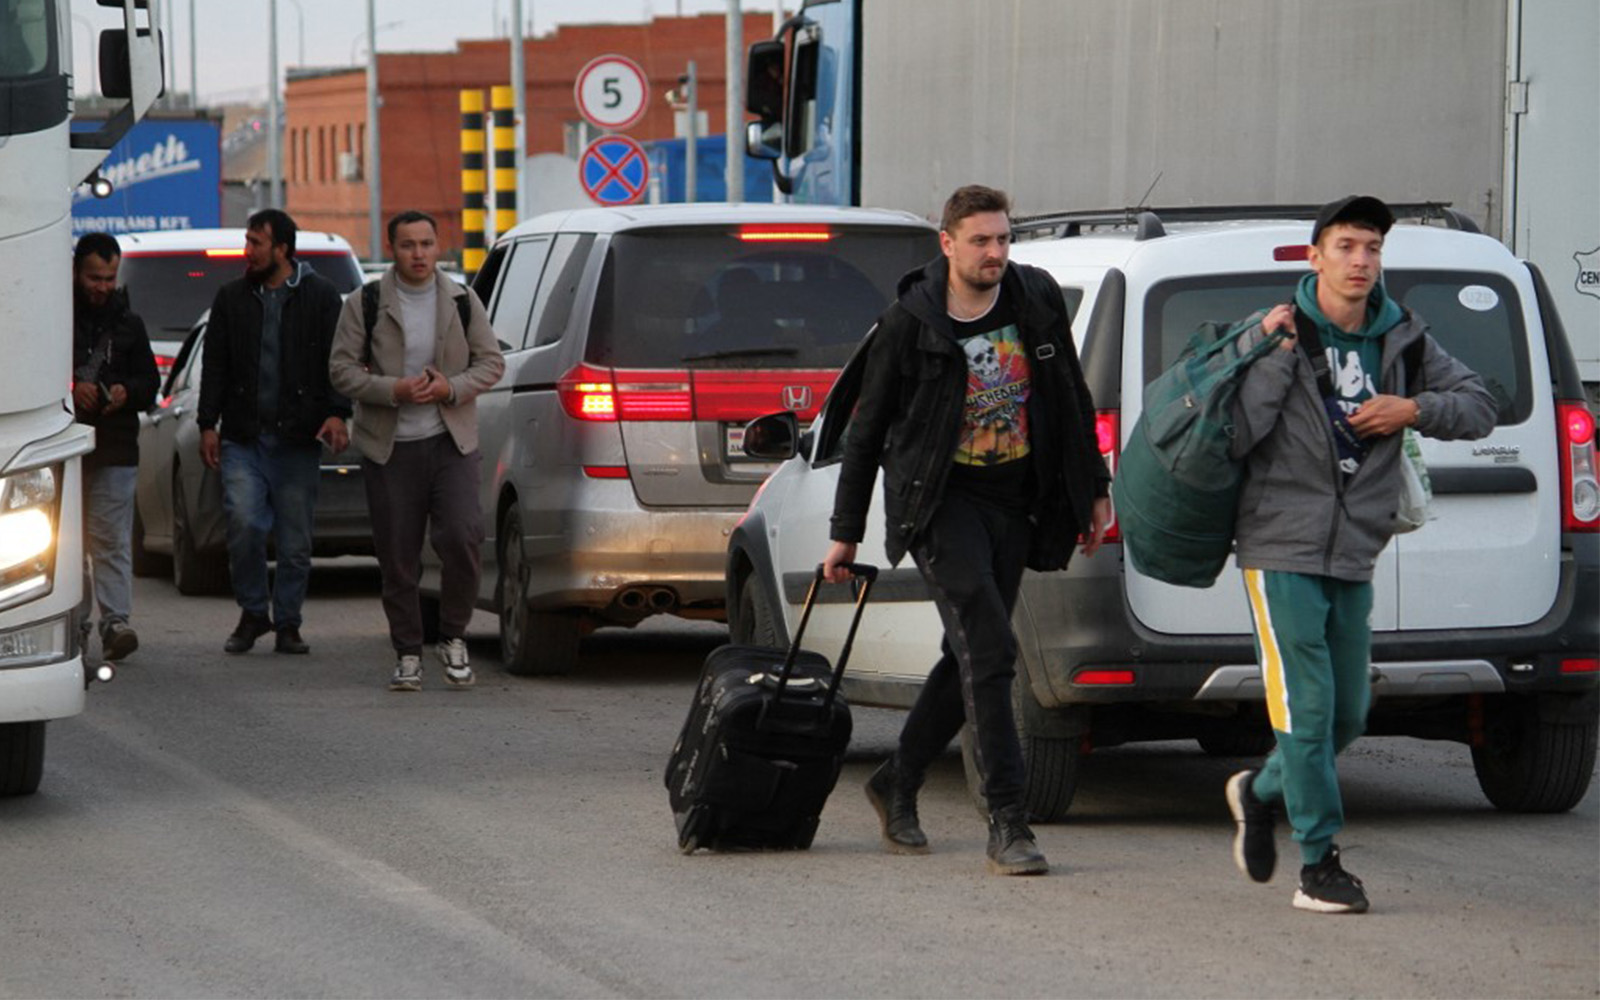 Russians arrive in Kazakhstan at the Syrym border crossing point on September 27, 2022. (AFP)